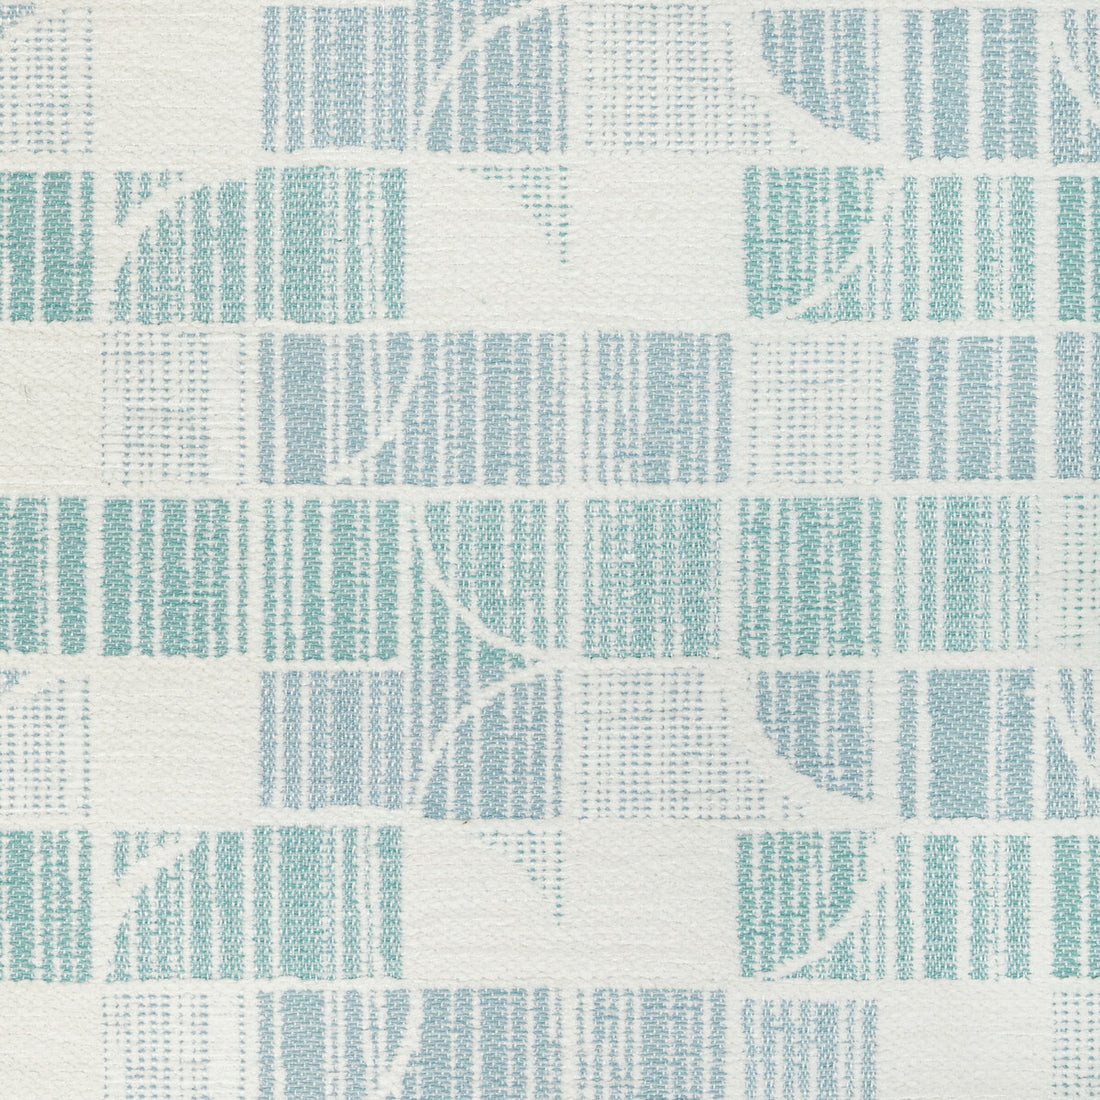 Upswing fabric in mineral color - pattern 36521.15.0 - by Kravet Contract in the Seaqual collection